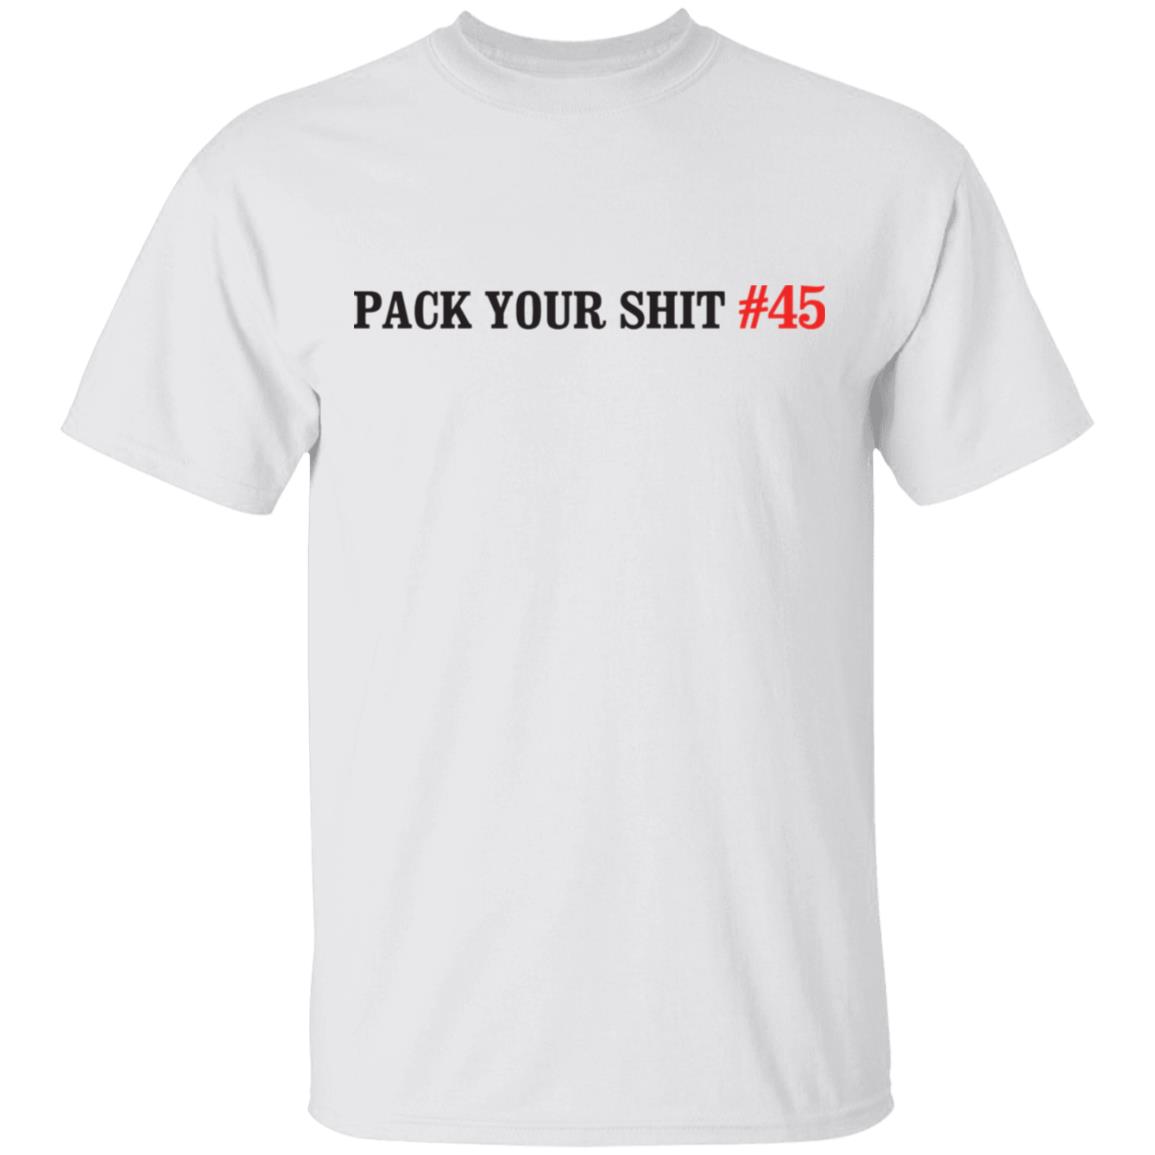 Pack your shit 45 shirt - Rockatee